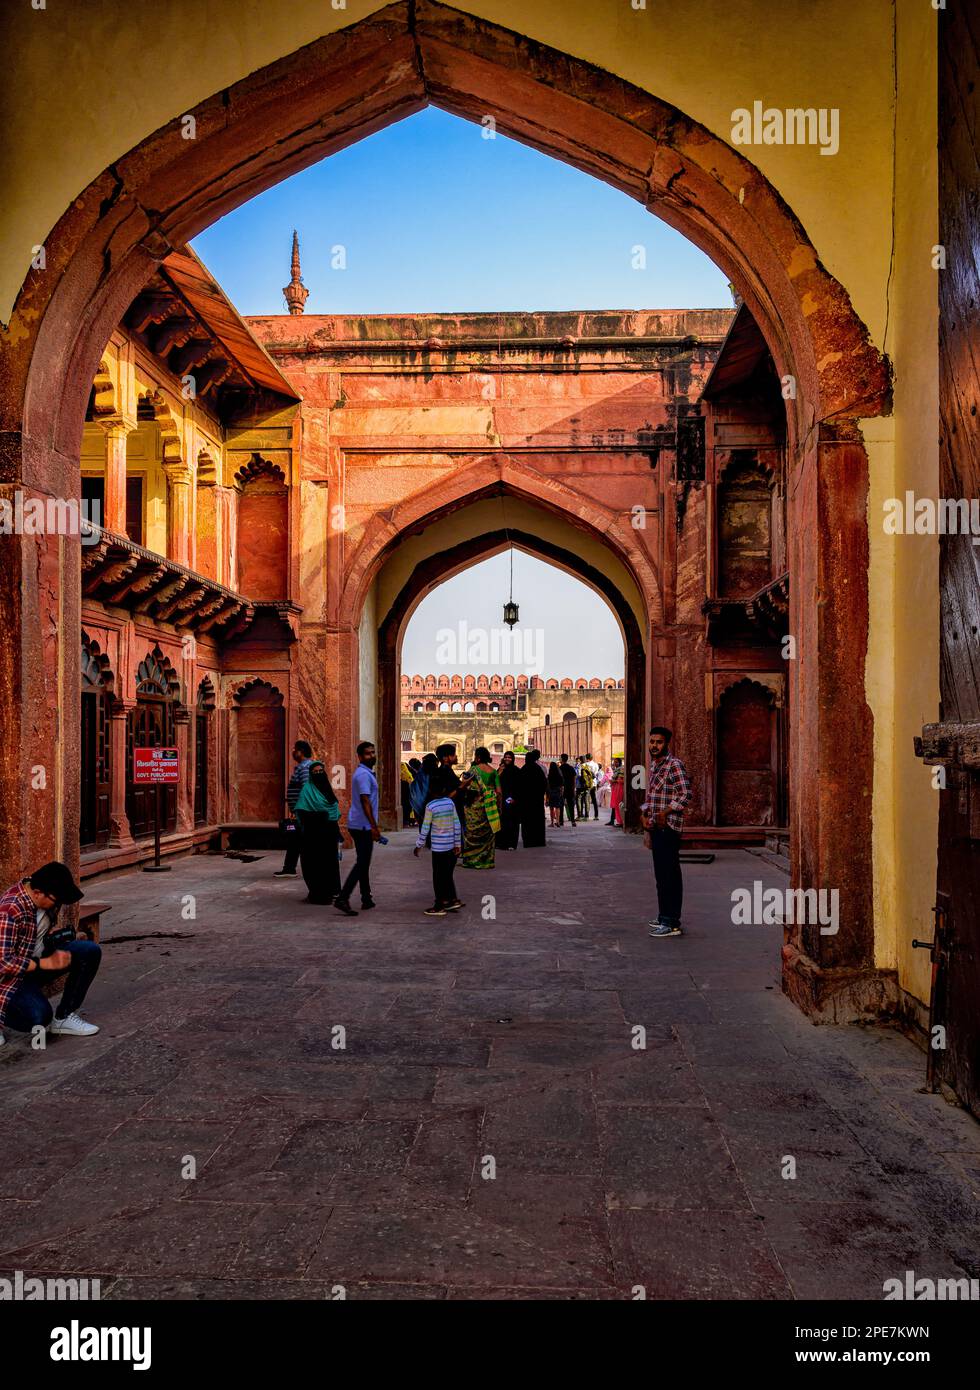 The inner gate of the Amar singh gate, the Southern entrance of the Agra fort Stock Photo